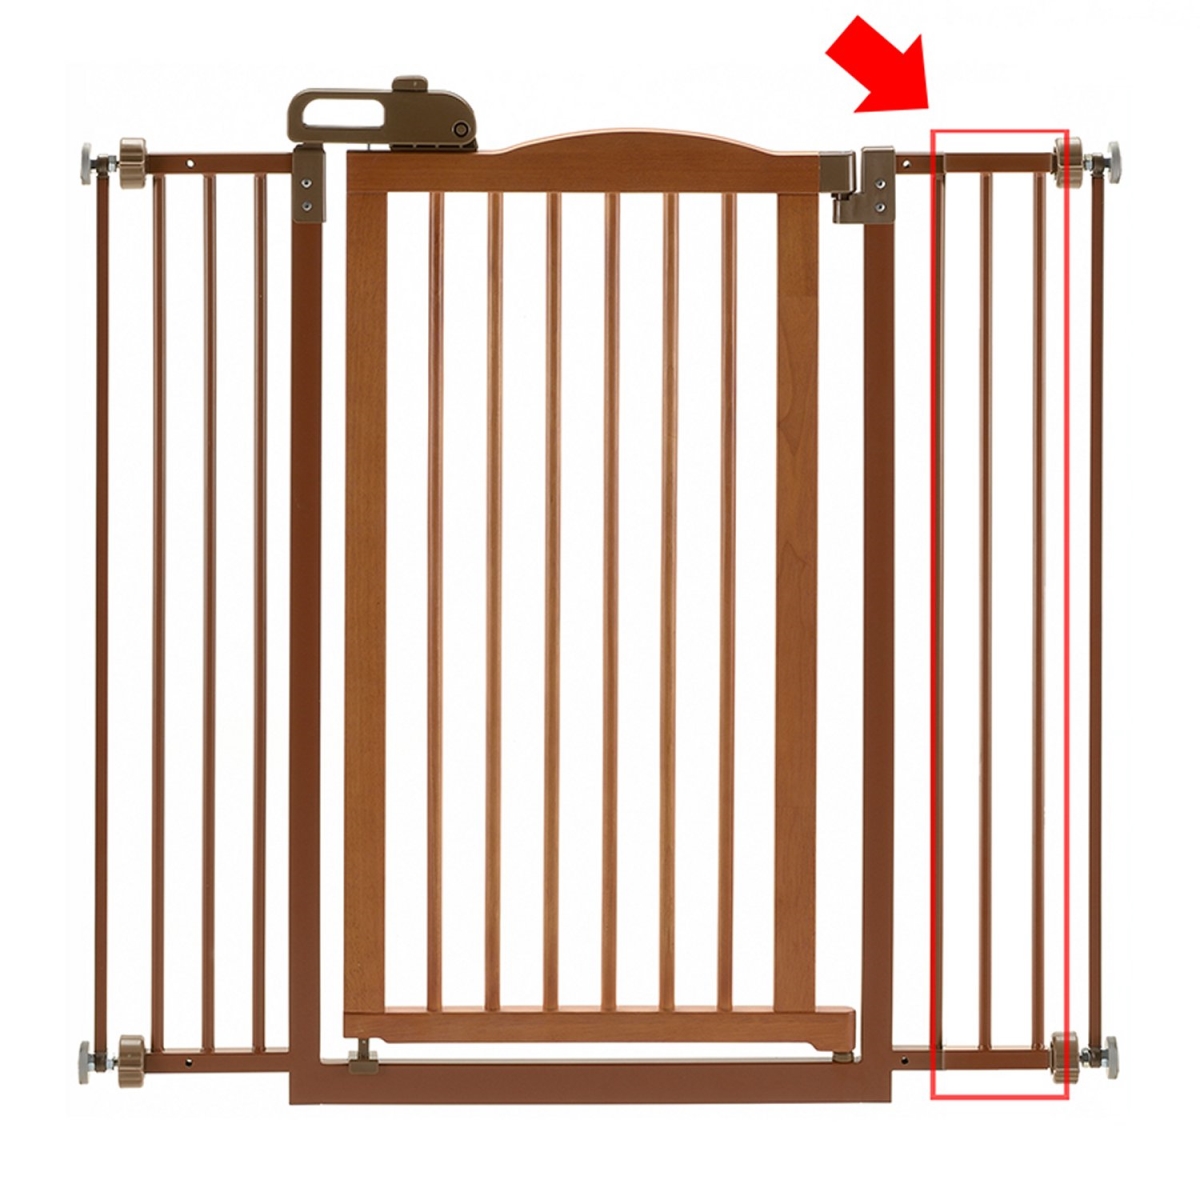 Picture of Richell 94356 3.9 x 0.8 x 34.8 in. One-Touch Gate II Extension - Brown - Tall